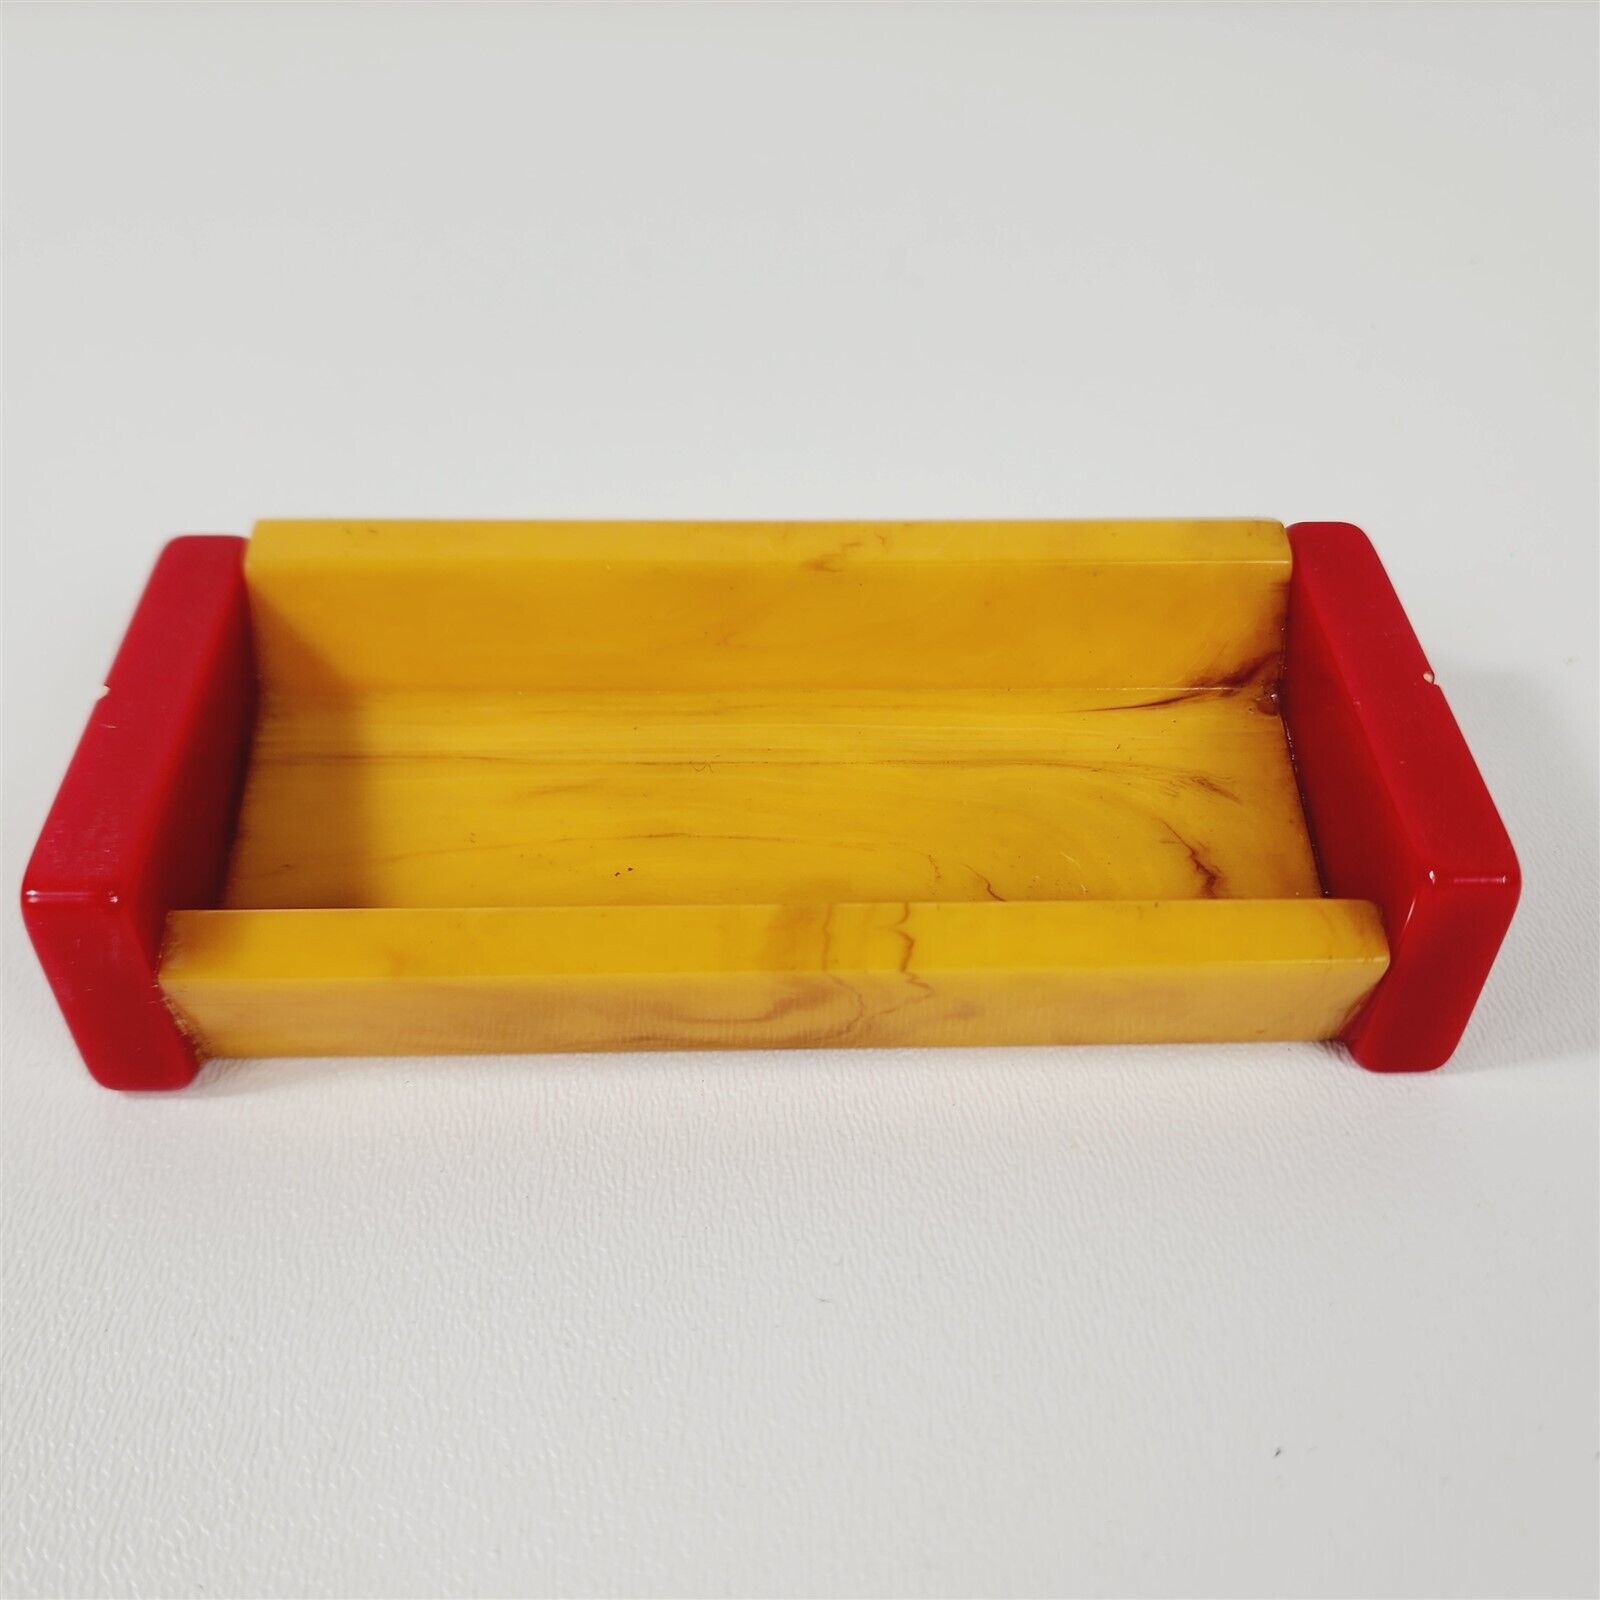 Vintage Bakelite Catalin Tray Holder Butterscotch Yellow & Red Domino Ends